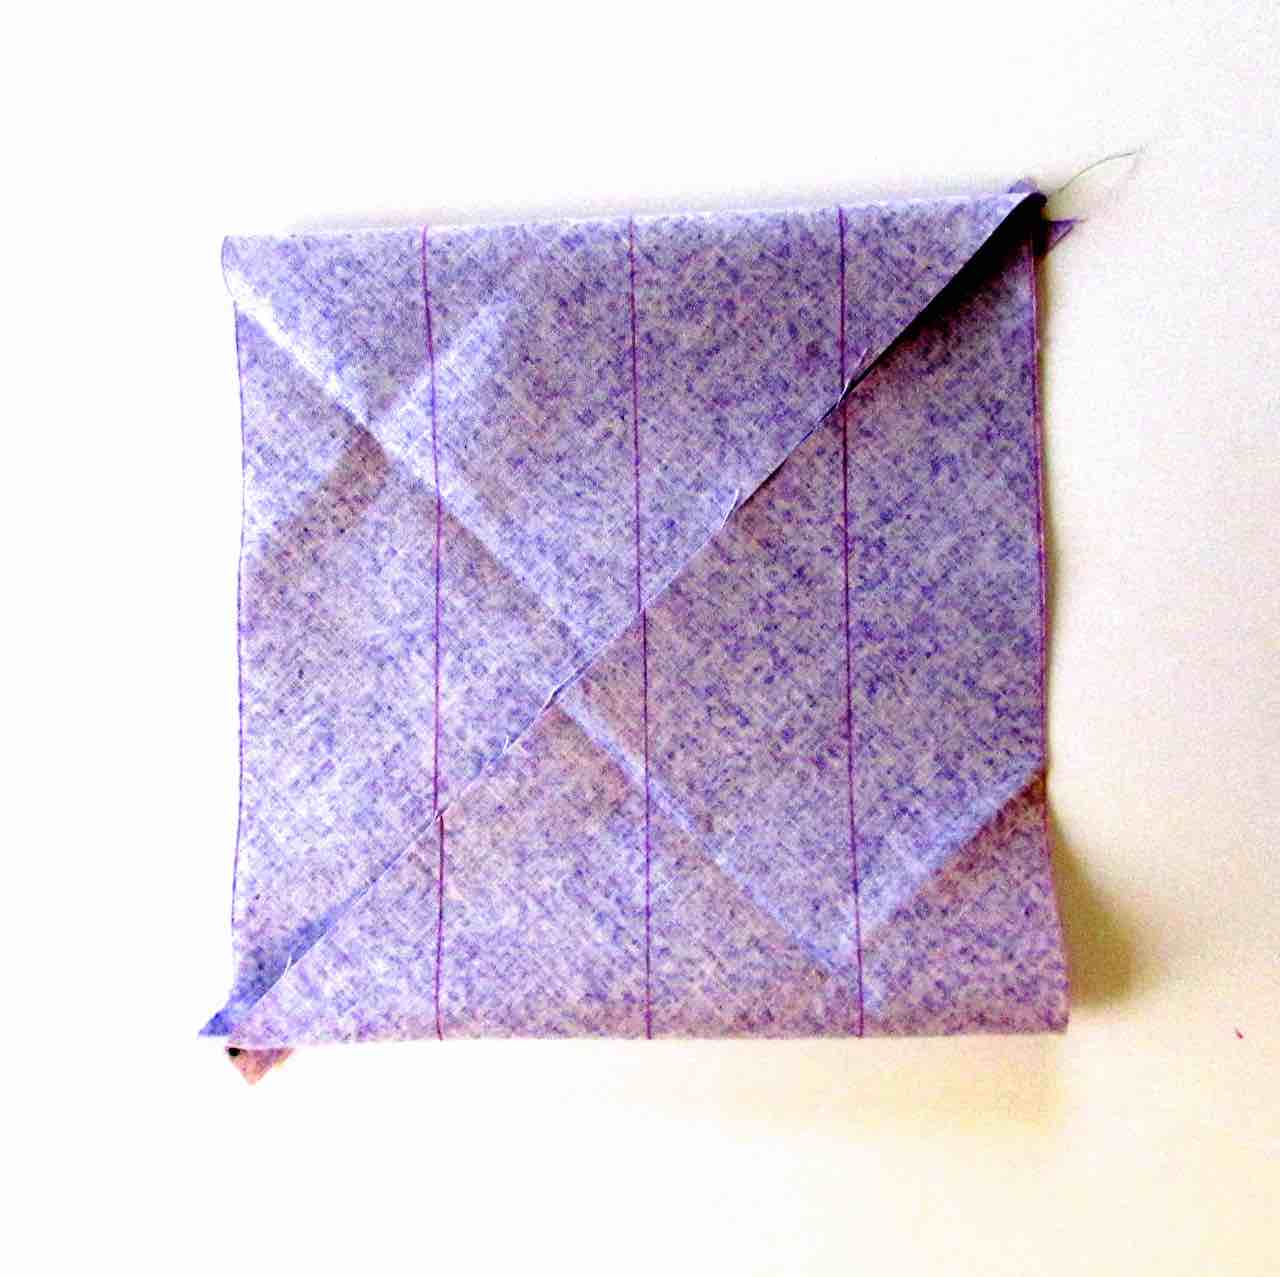 Parallelogram folded when making bias tape by www.itchinforsomestitchin.com